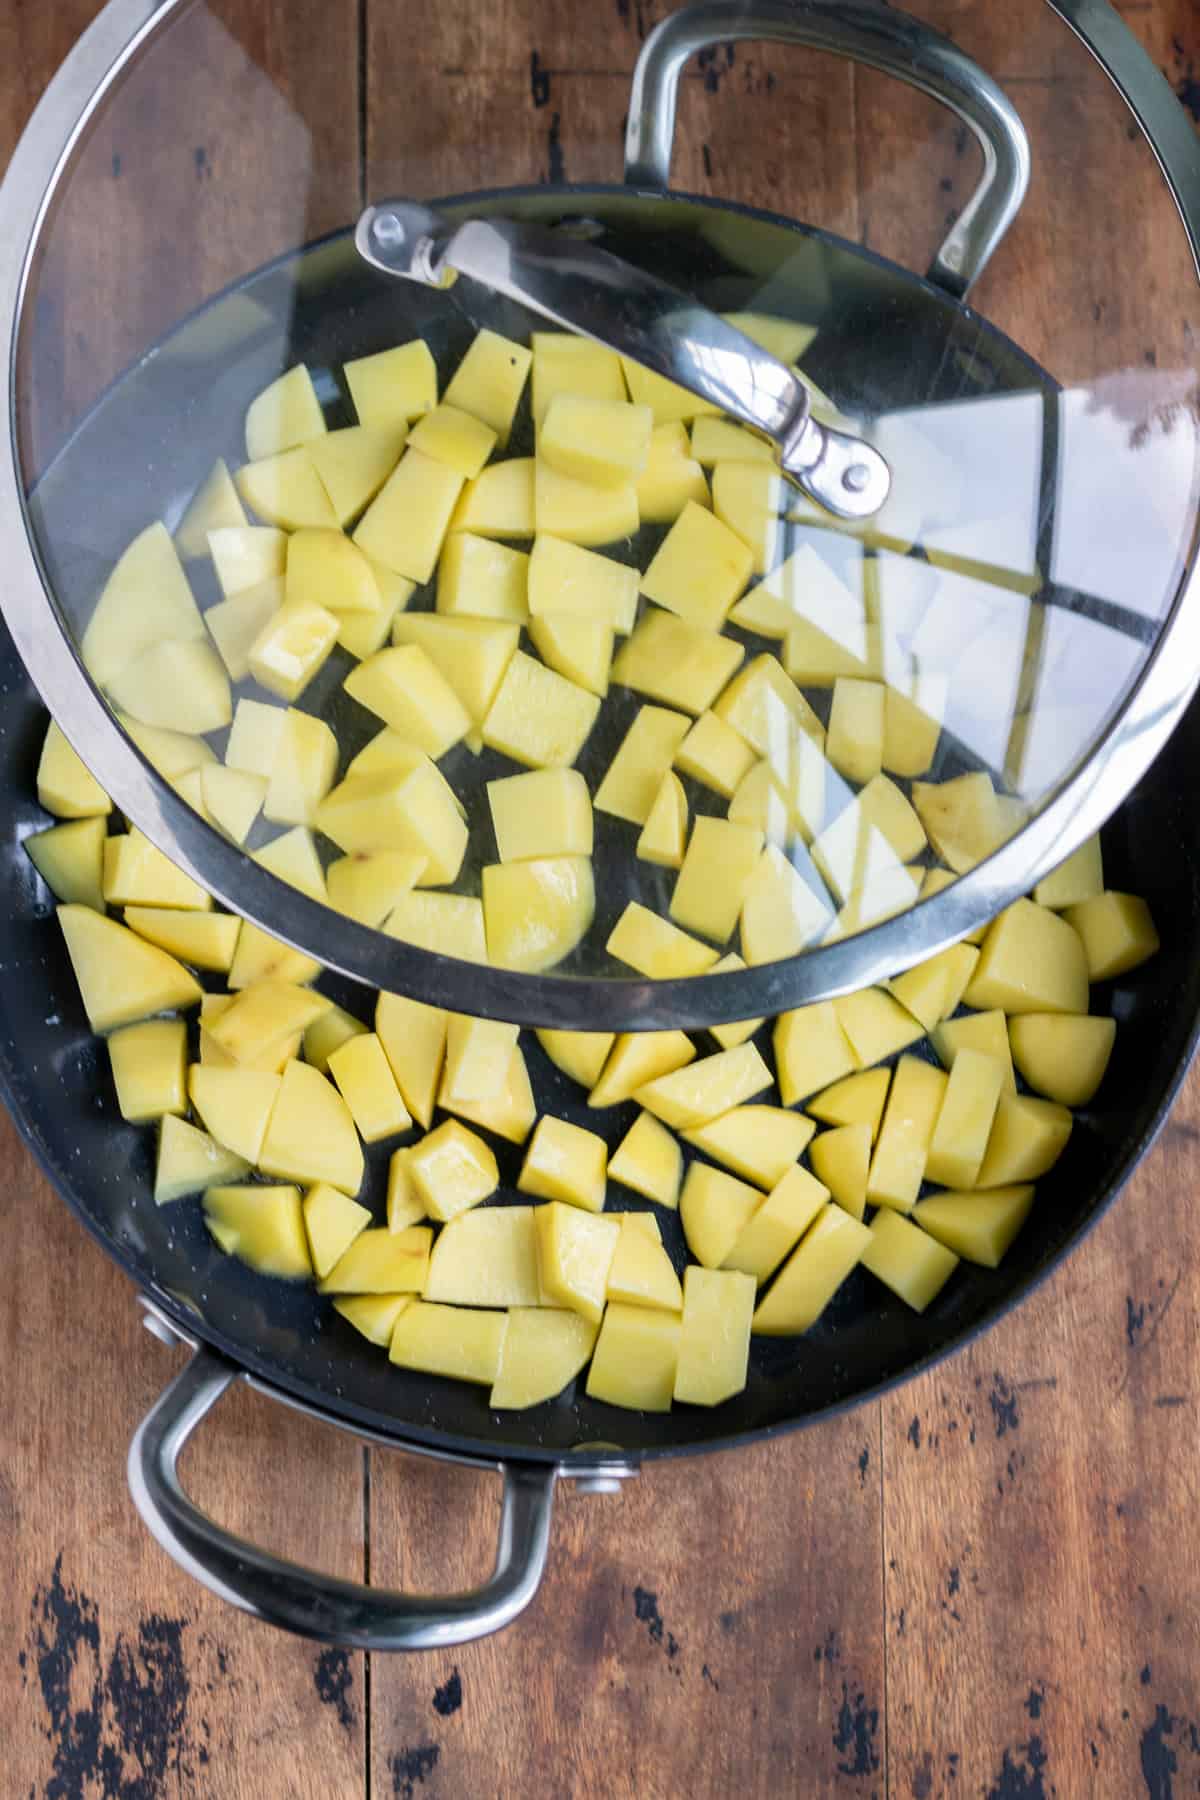 Cubed potatoes in a pan with a lid.